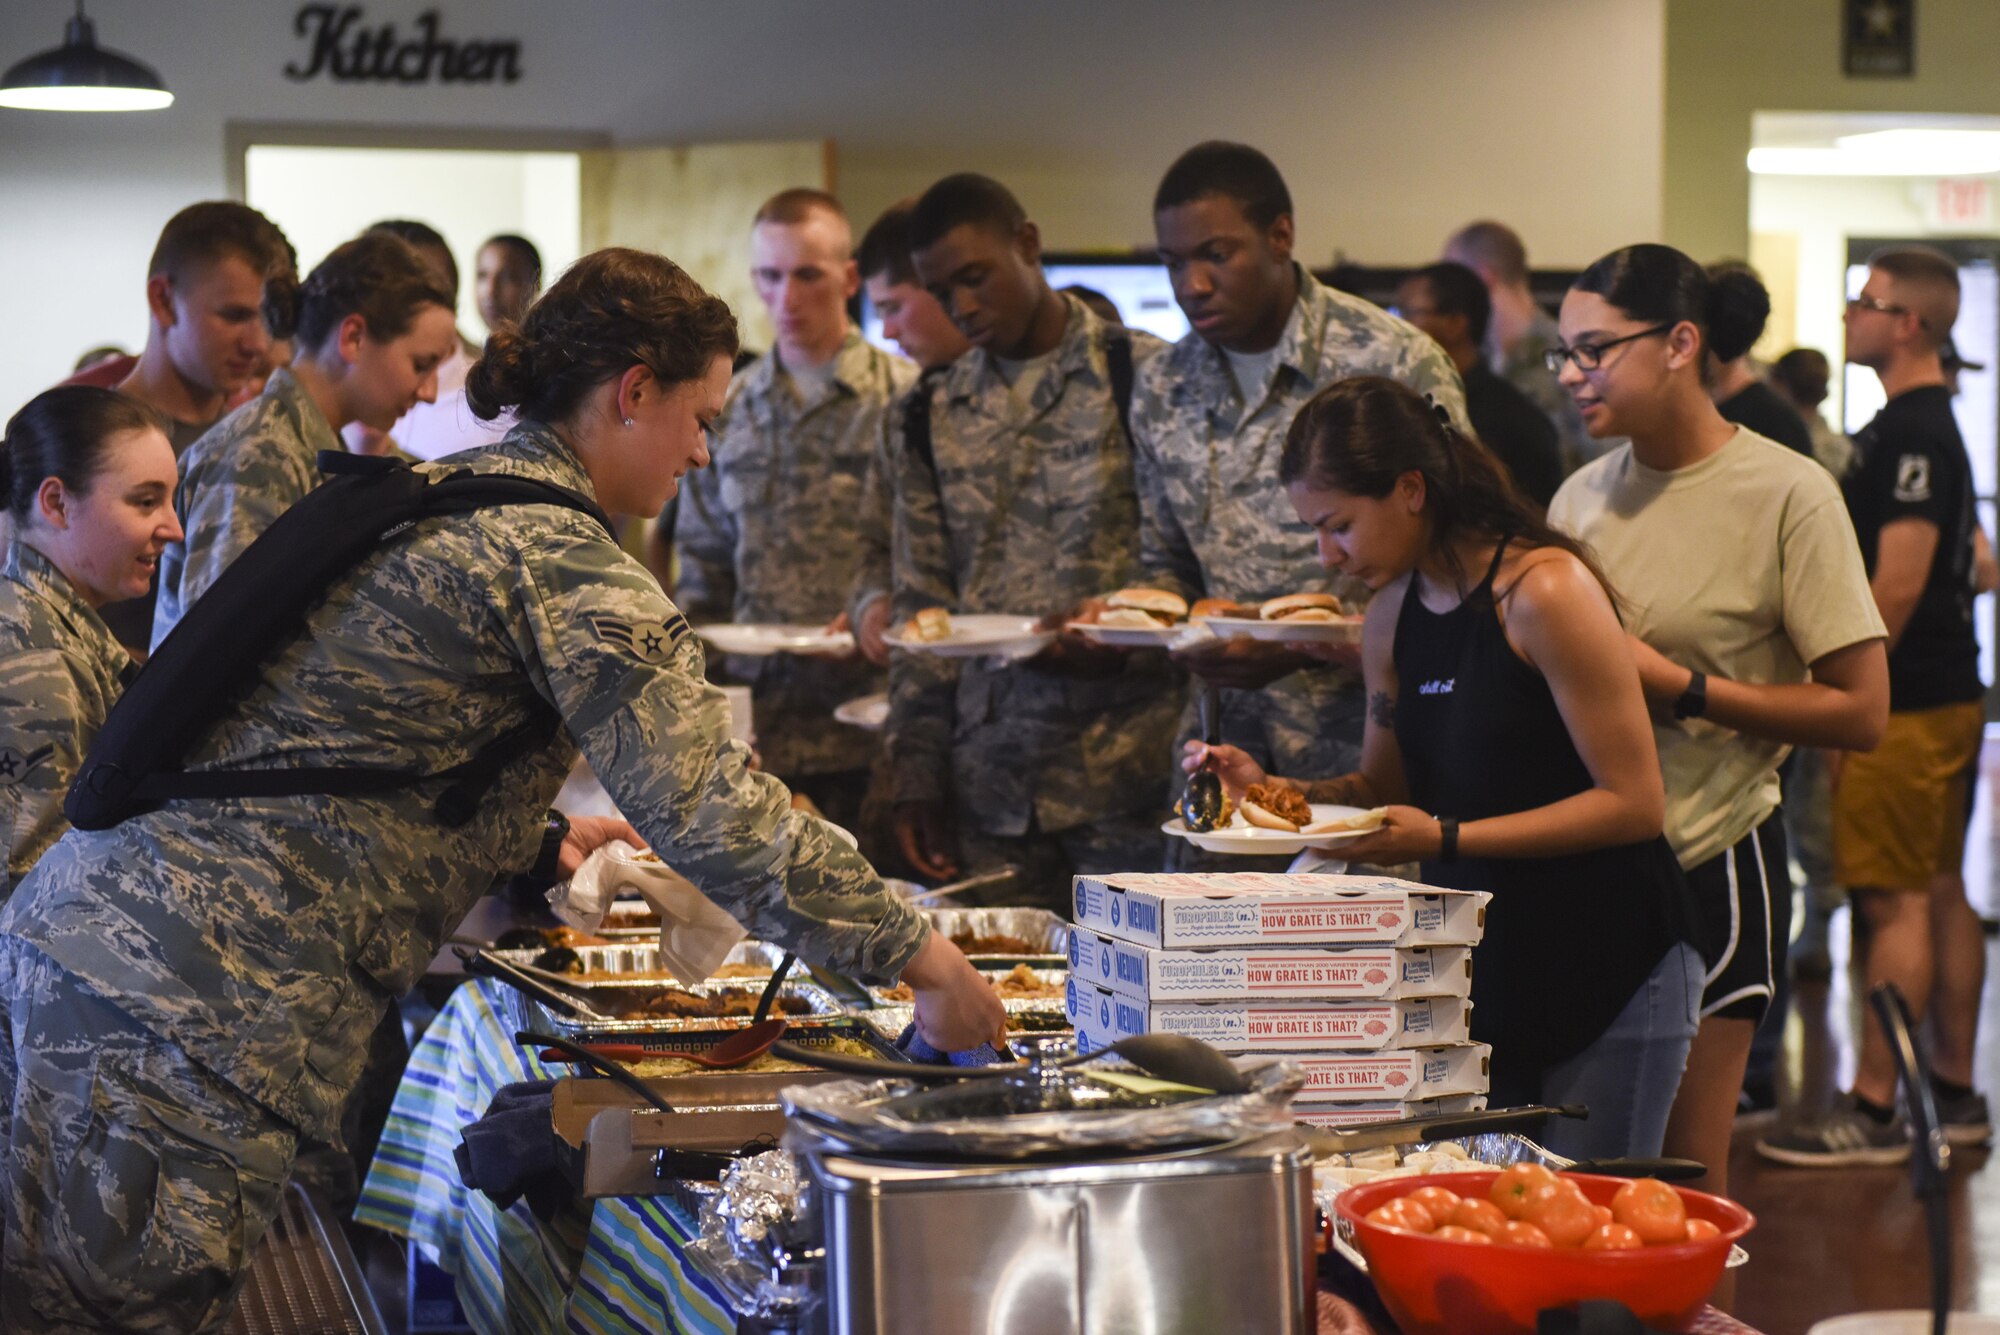 Airmen from various squadrons choose their food for the Airmen dorm dinner at the Crossroads on Goodfellow Air Force Base, Texas, Aug. 25, 2017. The free food was part of an event to show appreciation for Goodfellow students. (U.S. Air Force photo by Airman 1st Class Chase Sousa/Released)